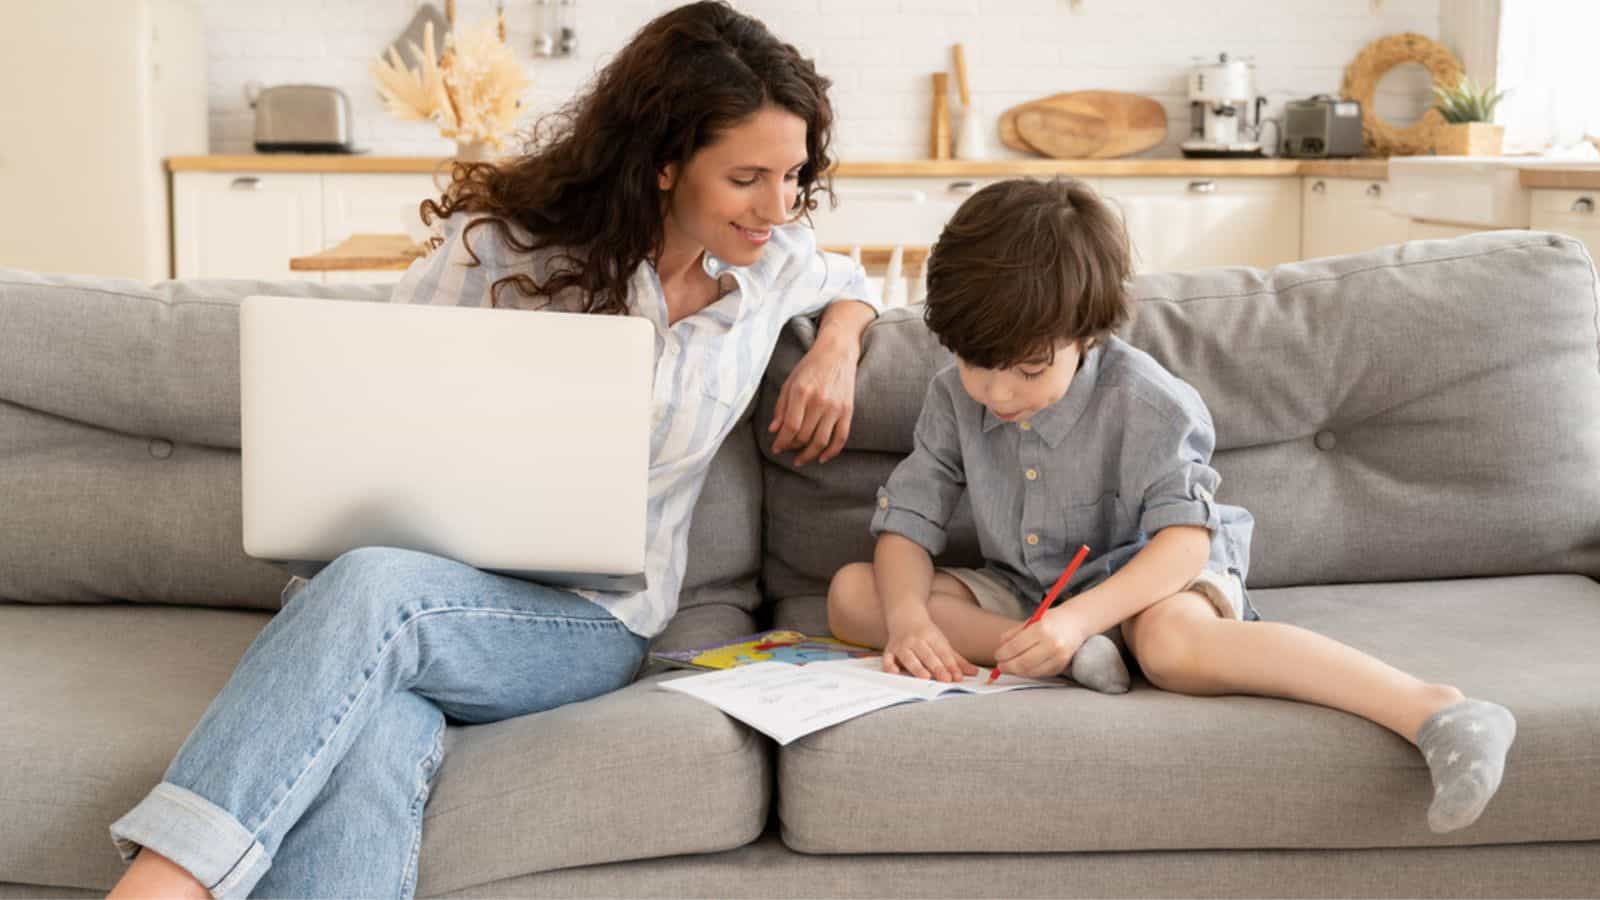 Young mother remote worker businesswoman with preschooler son on couch working on laptop computer